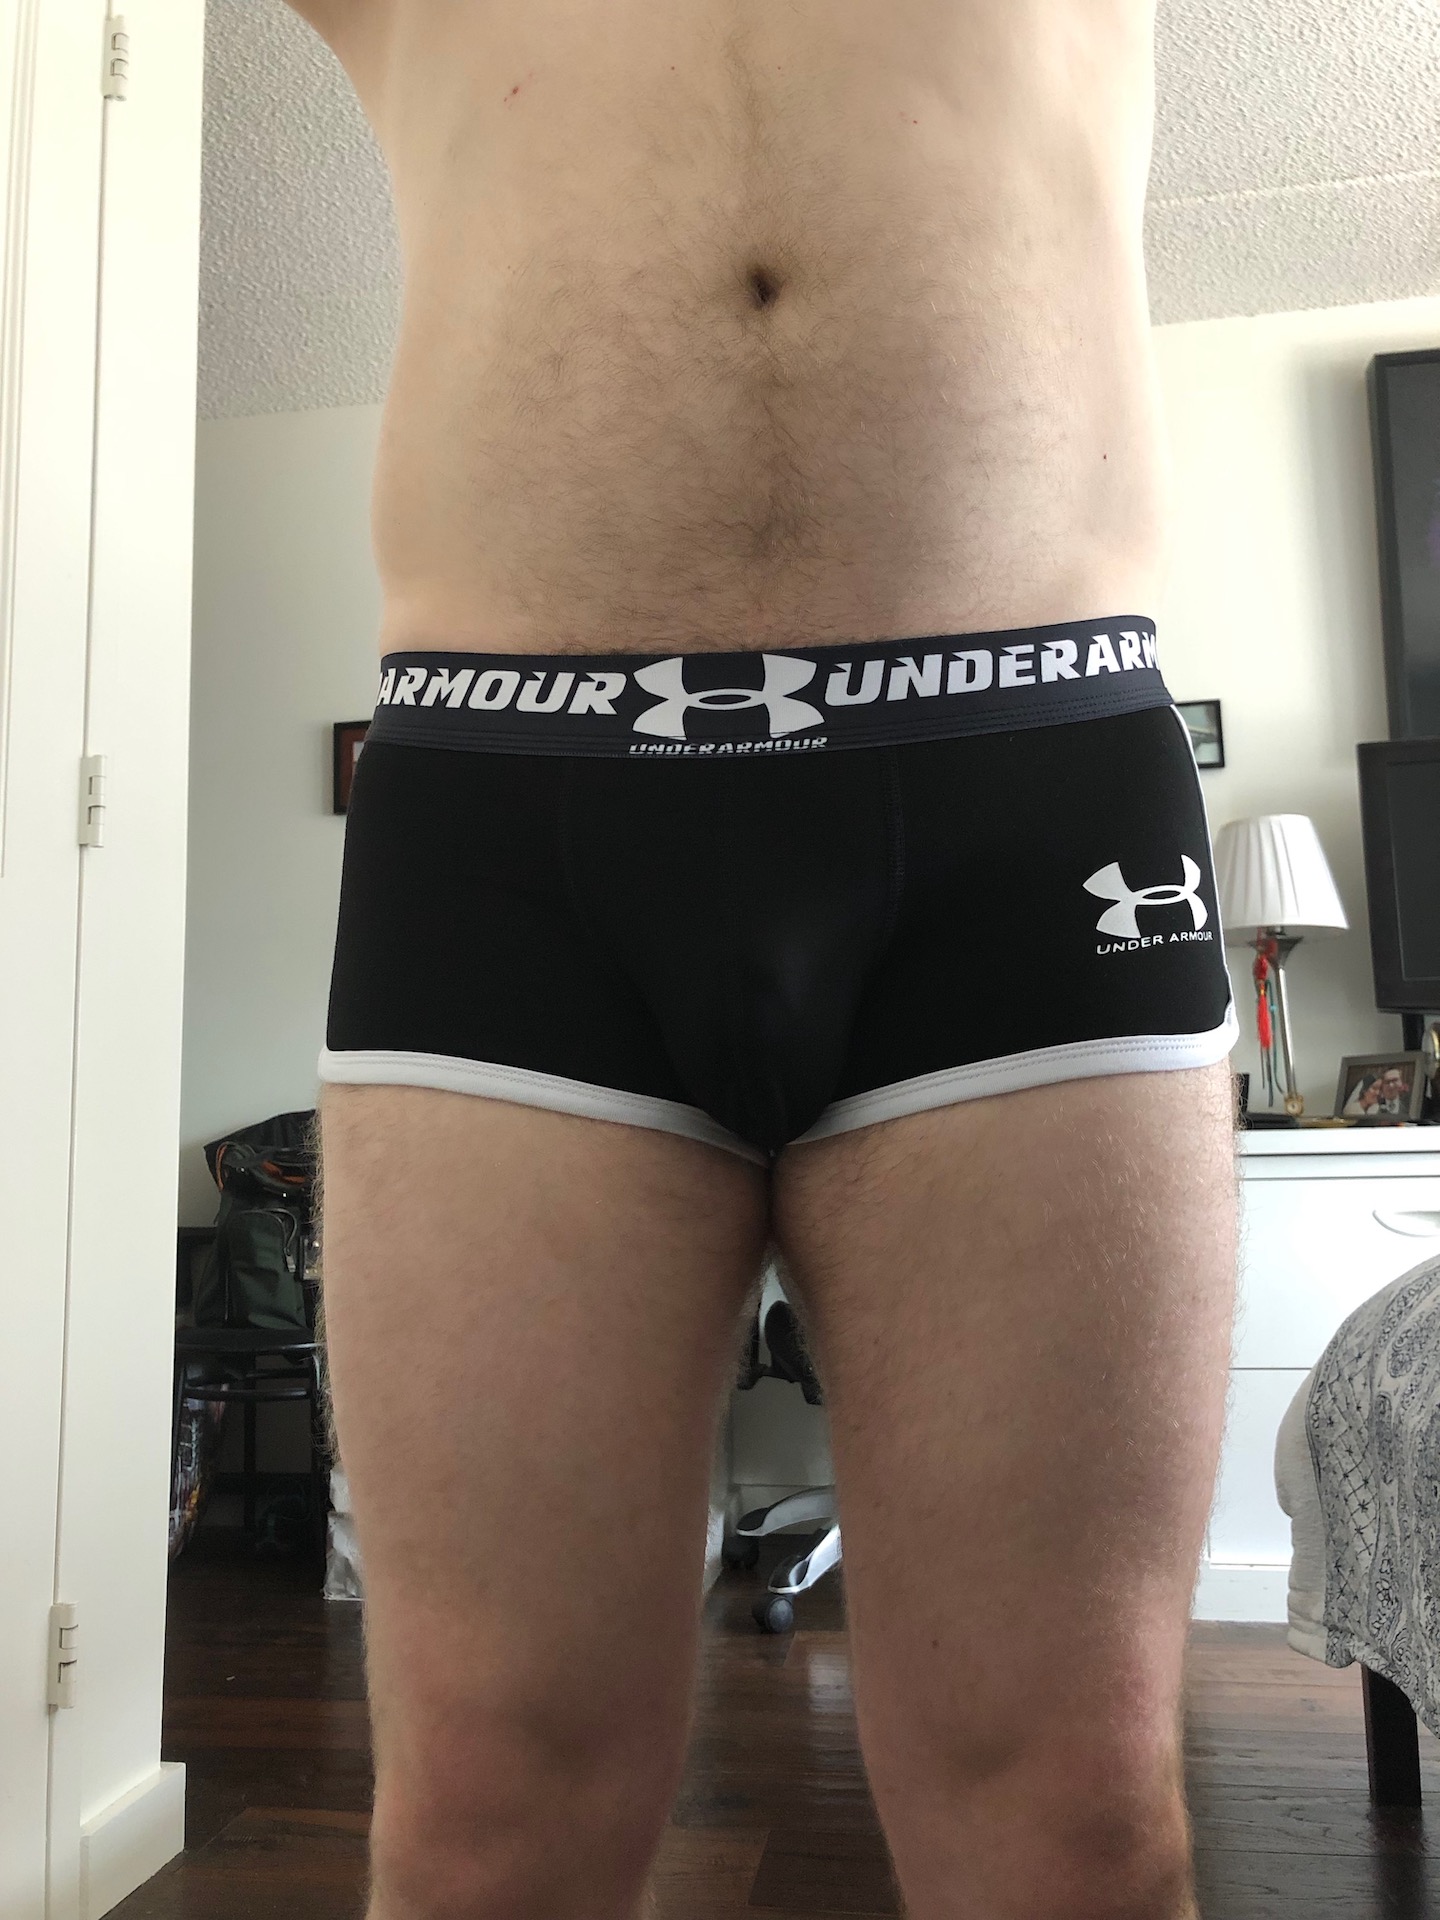 Unique Under Armour trunks to end my week…